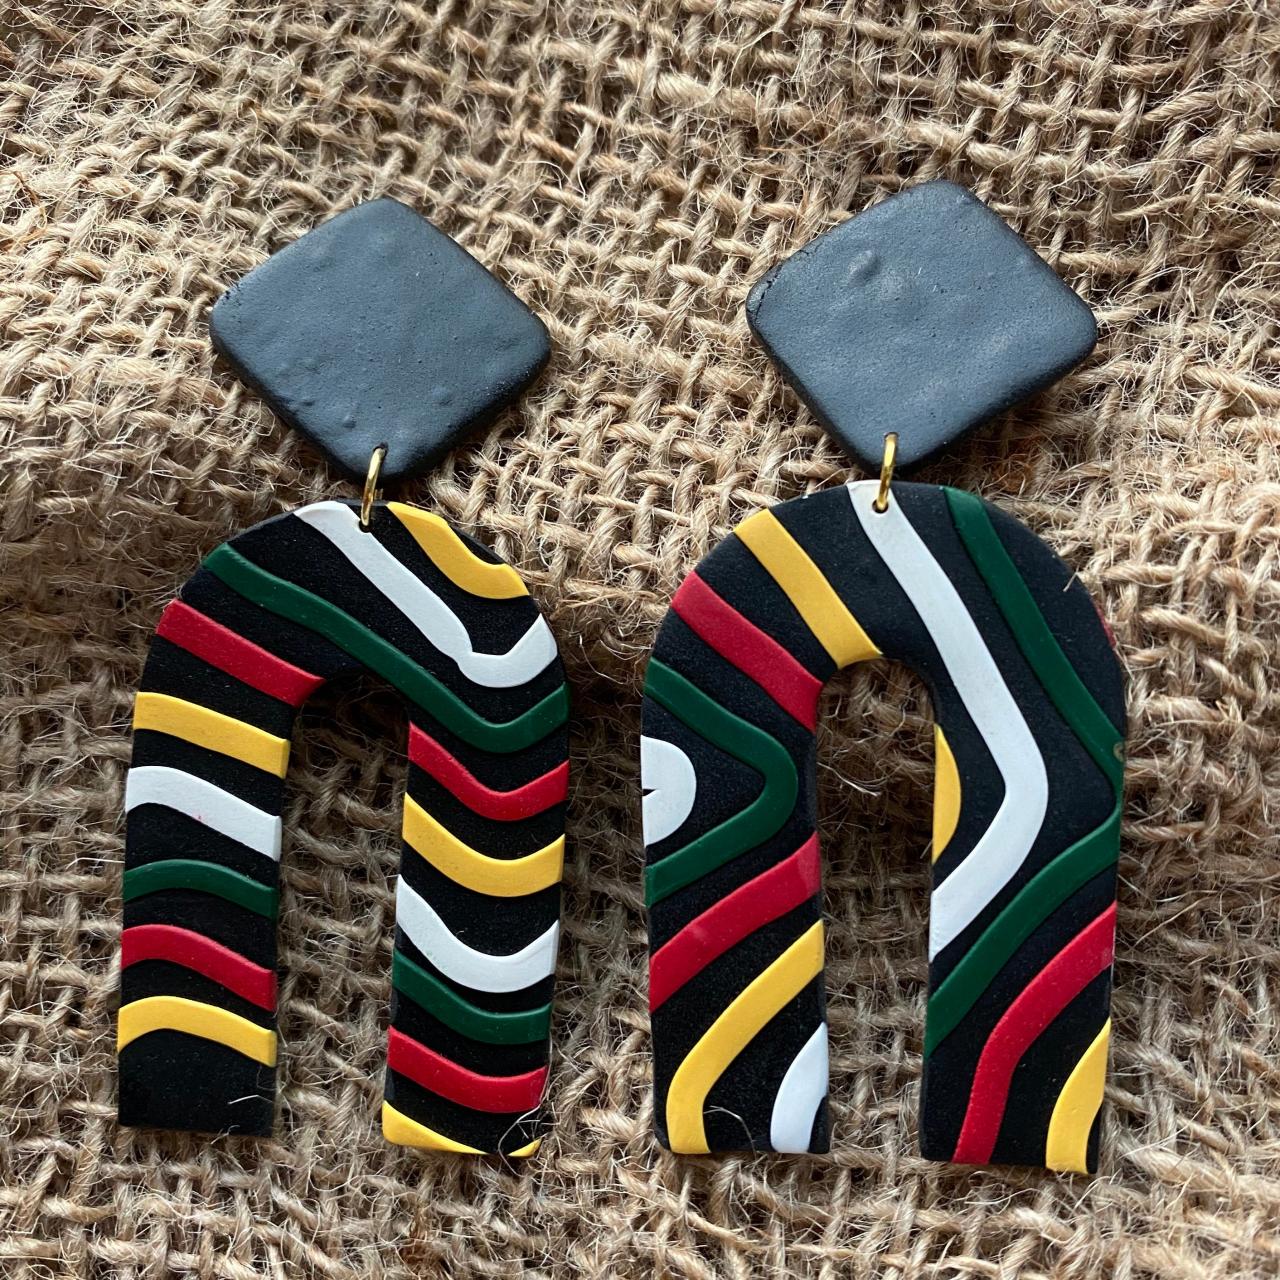 Aurelia Polymer Clay Earrings | Black, Red, Forest Green, White, Golden Life Yellow Polymer Clay Dangle Earrings | Colorful Statement Earrings |